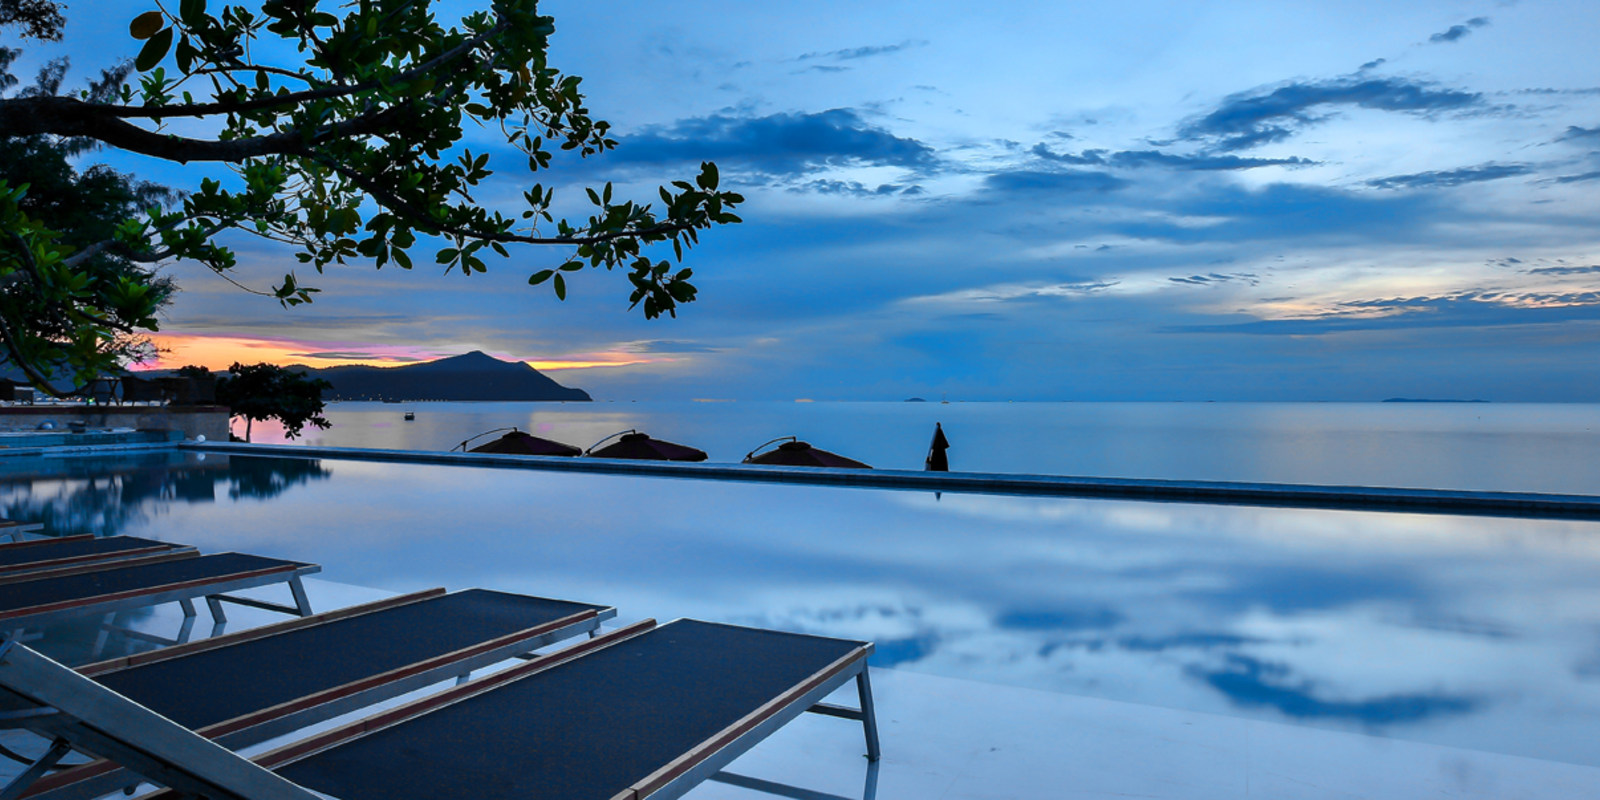 Pattaya a luxury destination? Here are the Top 6 accommodations to consider